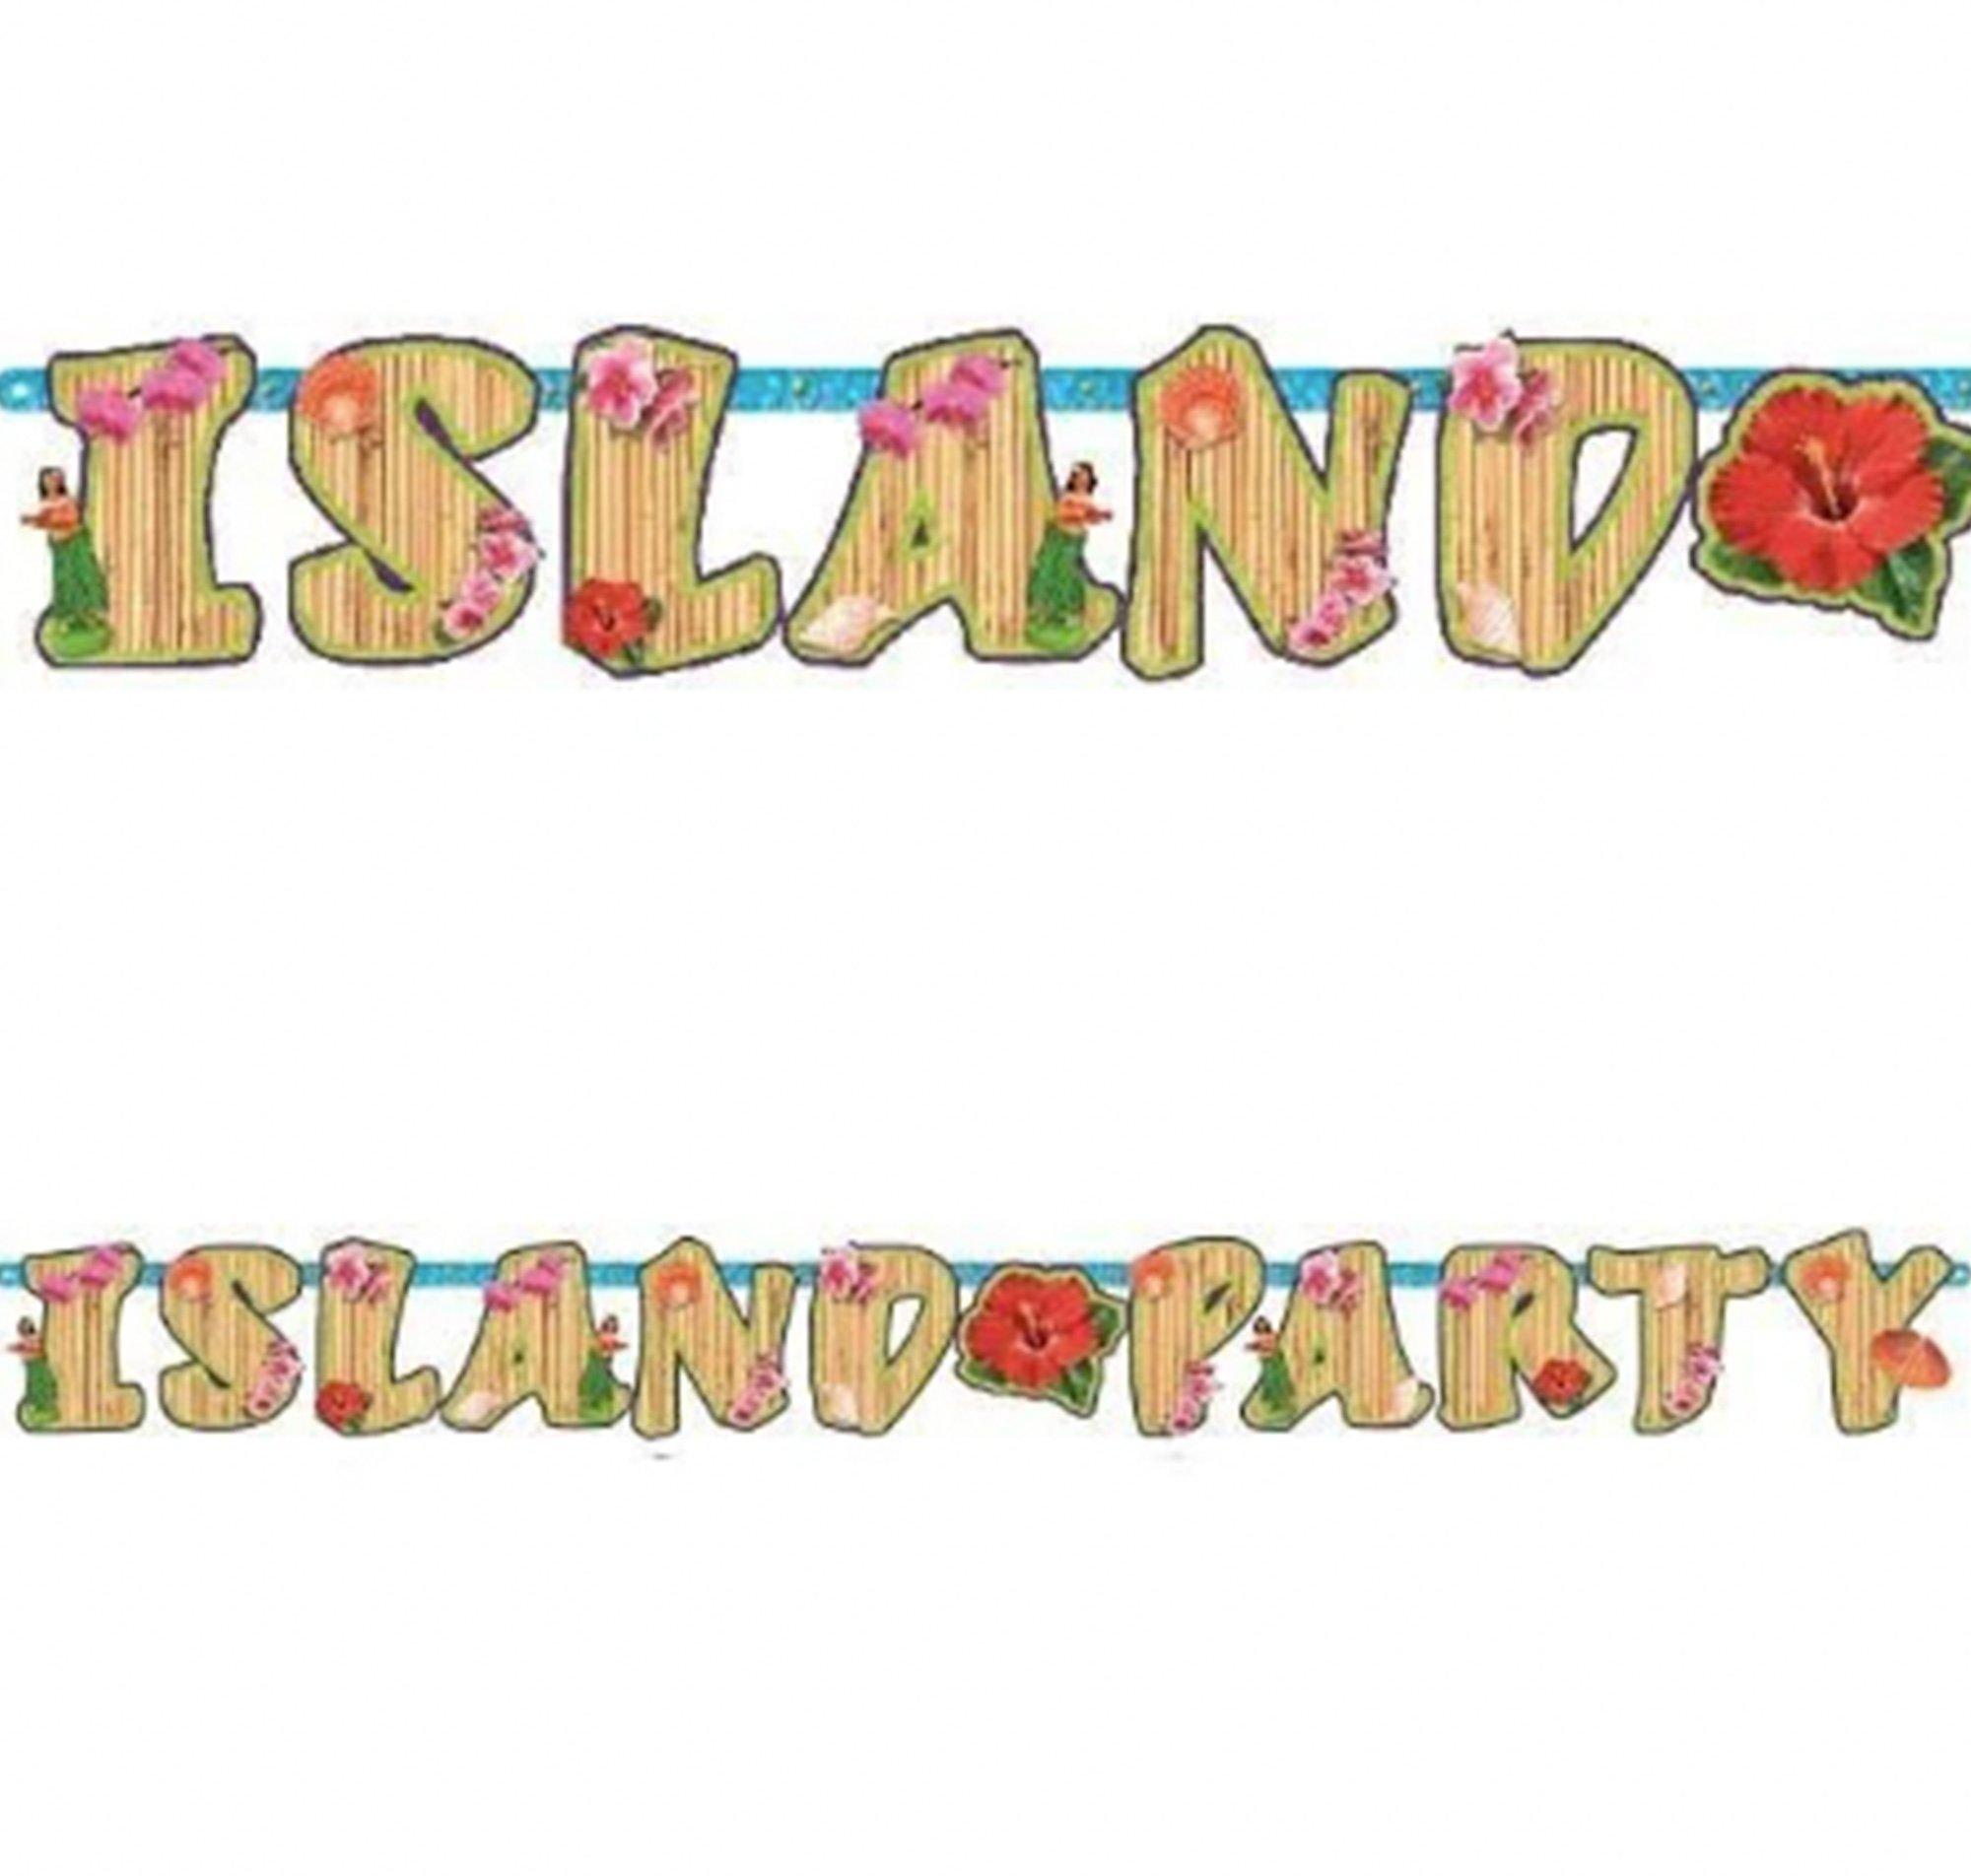 Island Party Letter Banner, 6.5ft